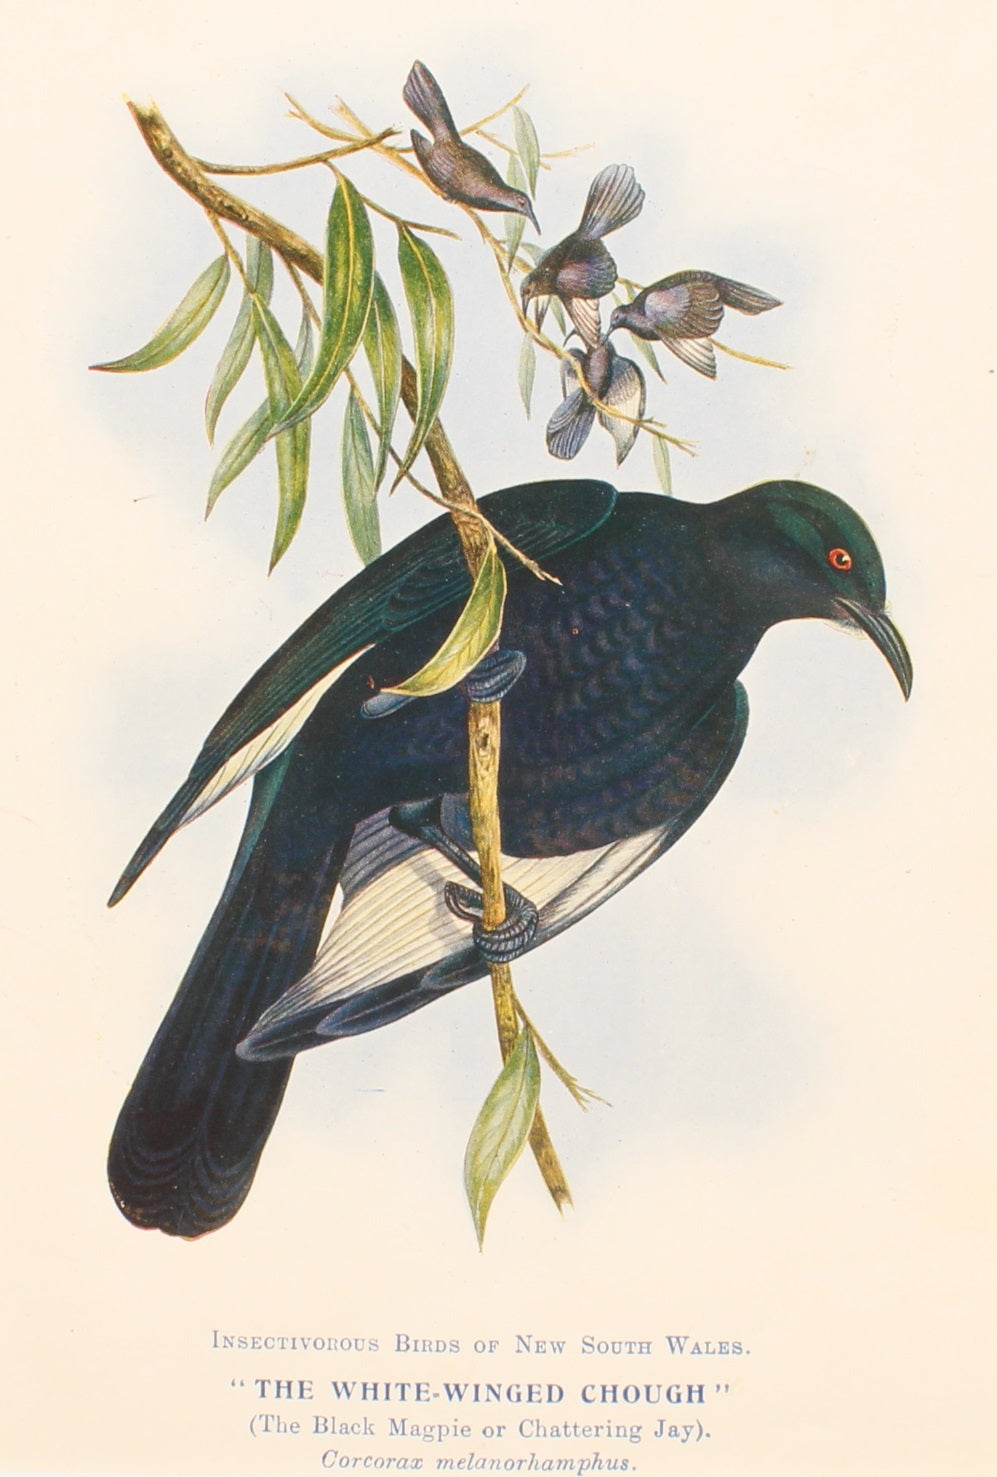 Bird, North Alfred John, White Winged Chough  Insectivorous Birds of NSW, 1896